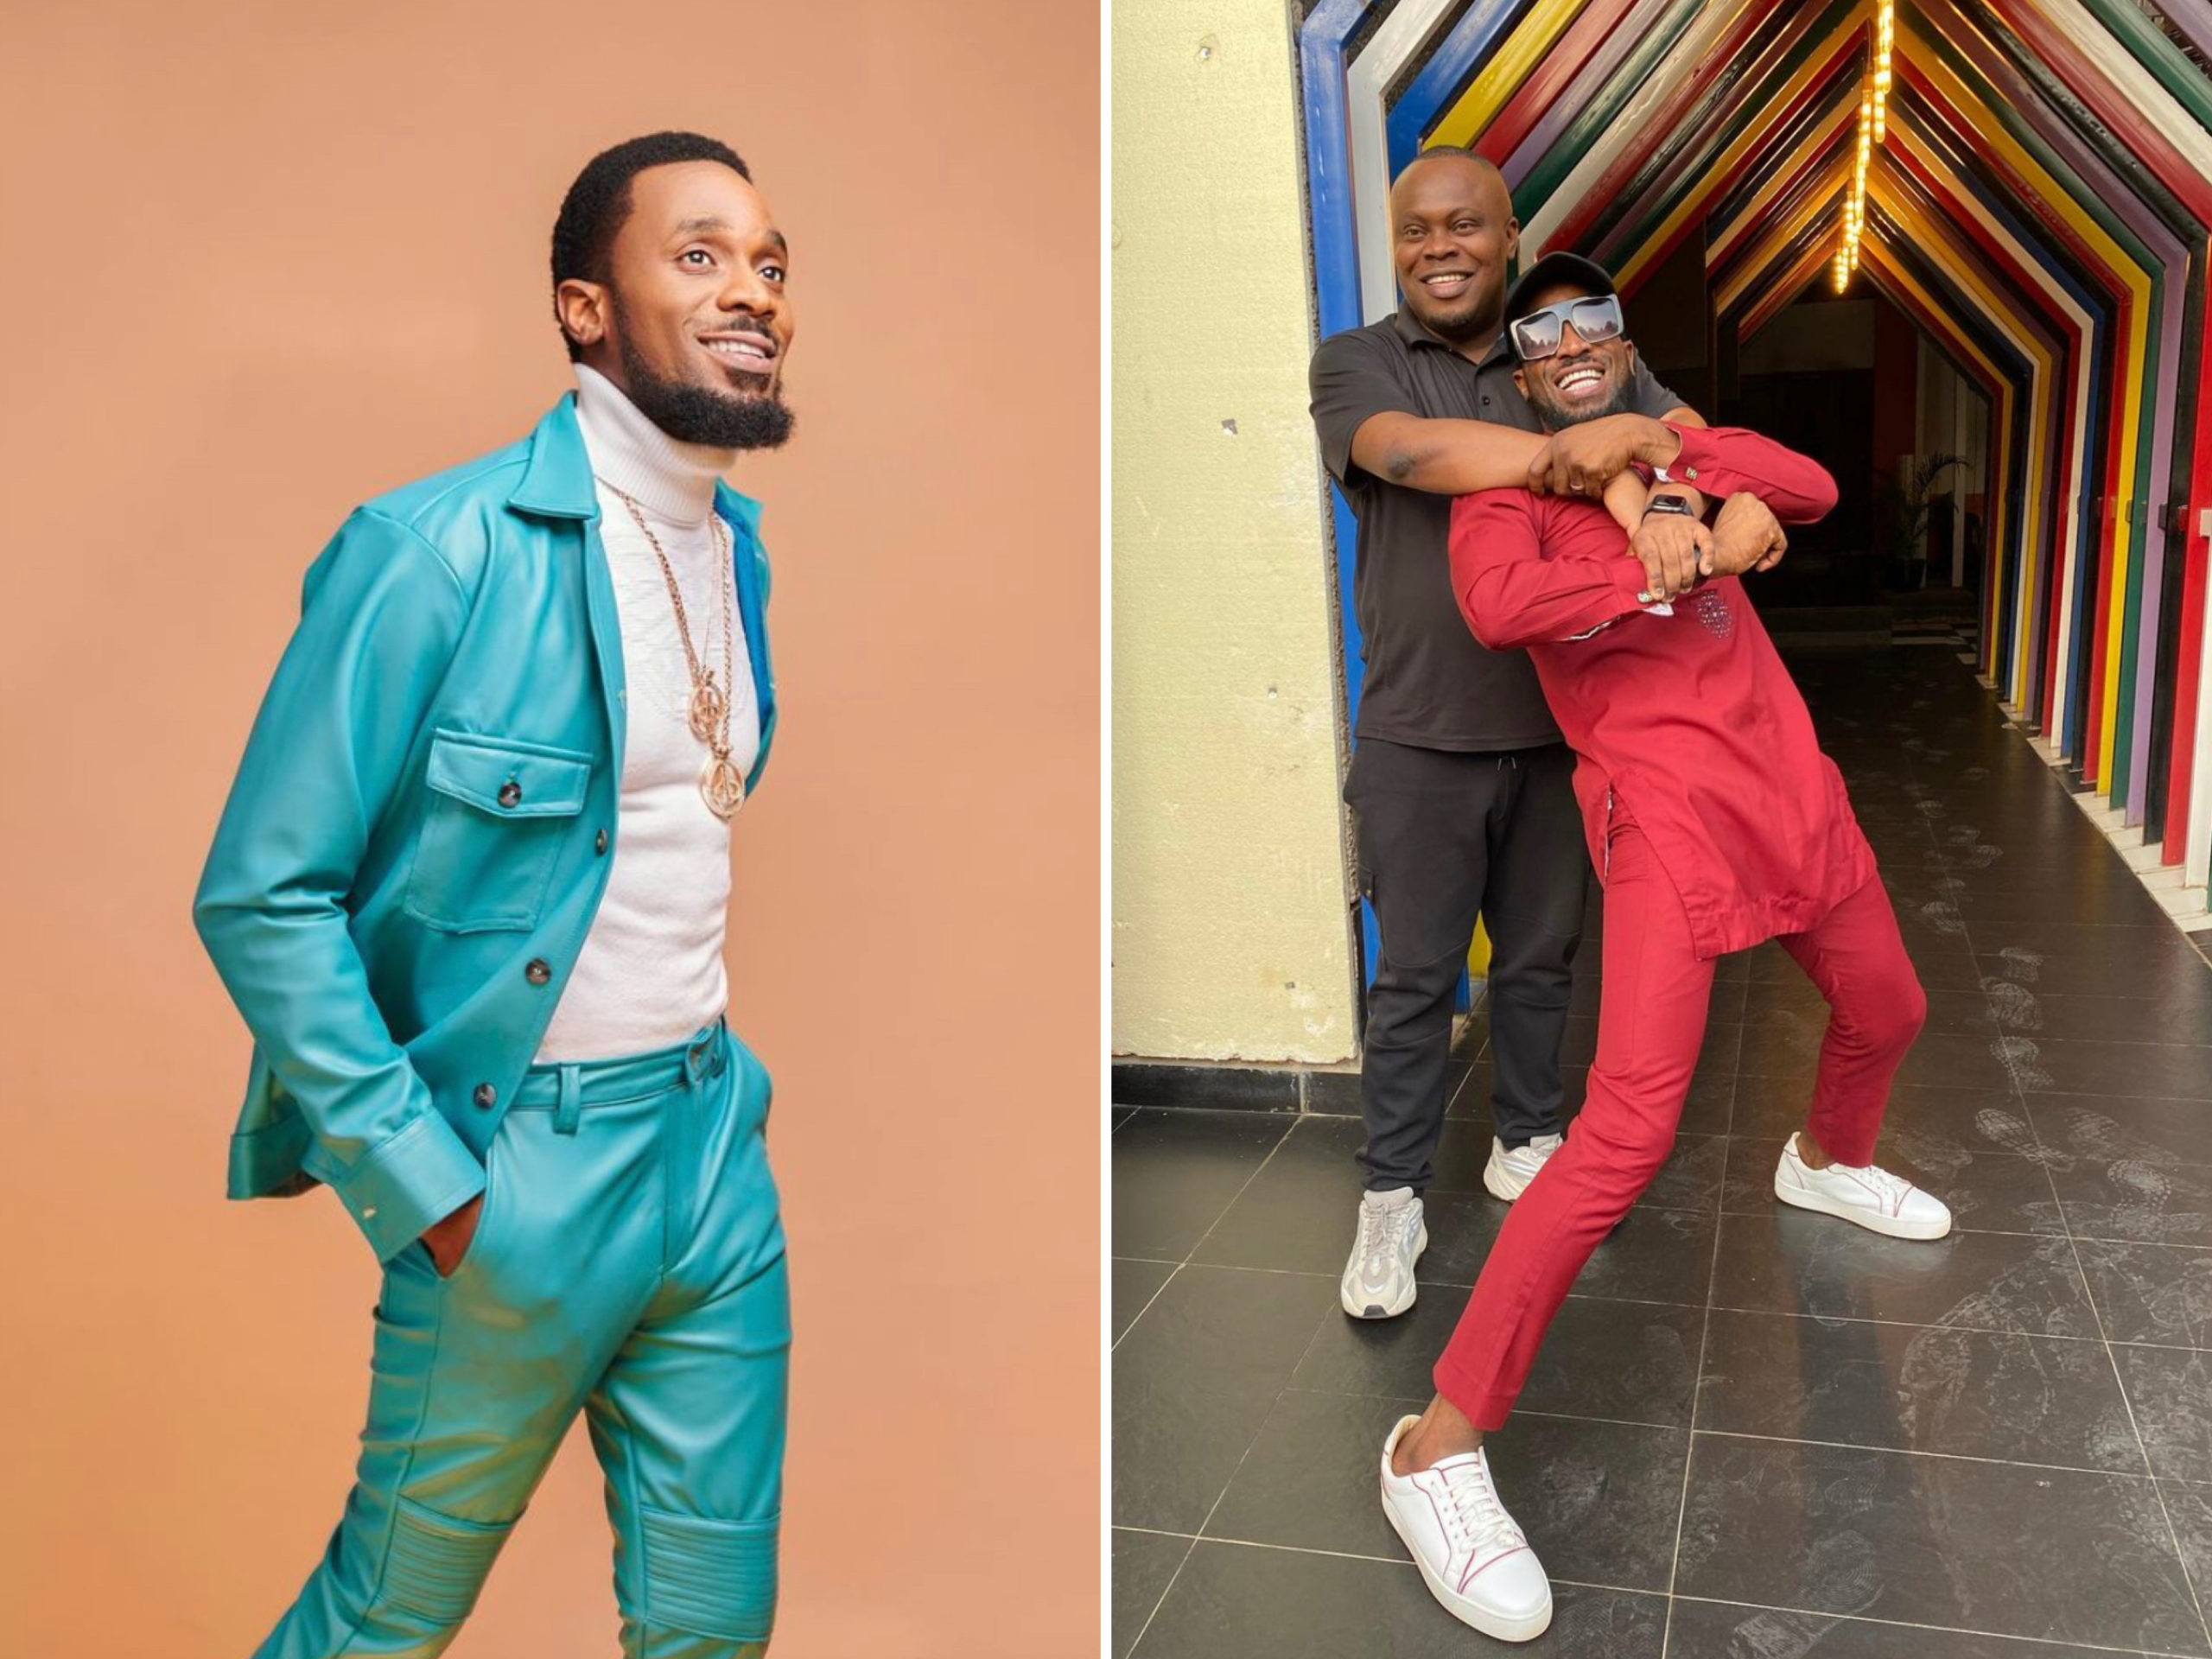 ‘I’m Back’ - Singer D’Banj Says As He Reconciles With Former Manager, Bankuli Years After Fall Out